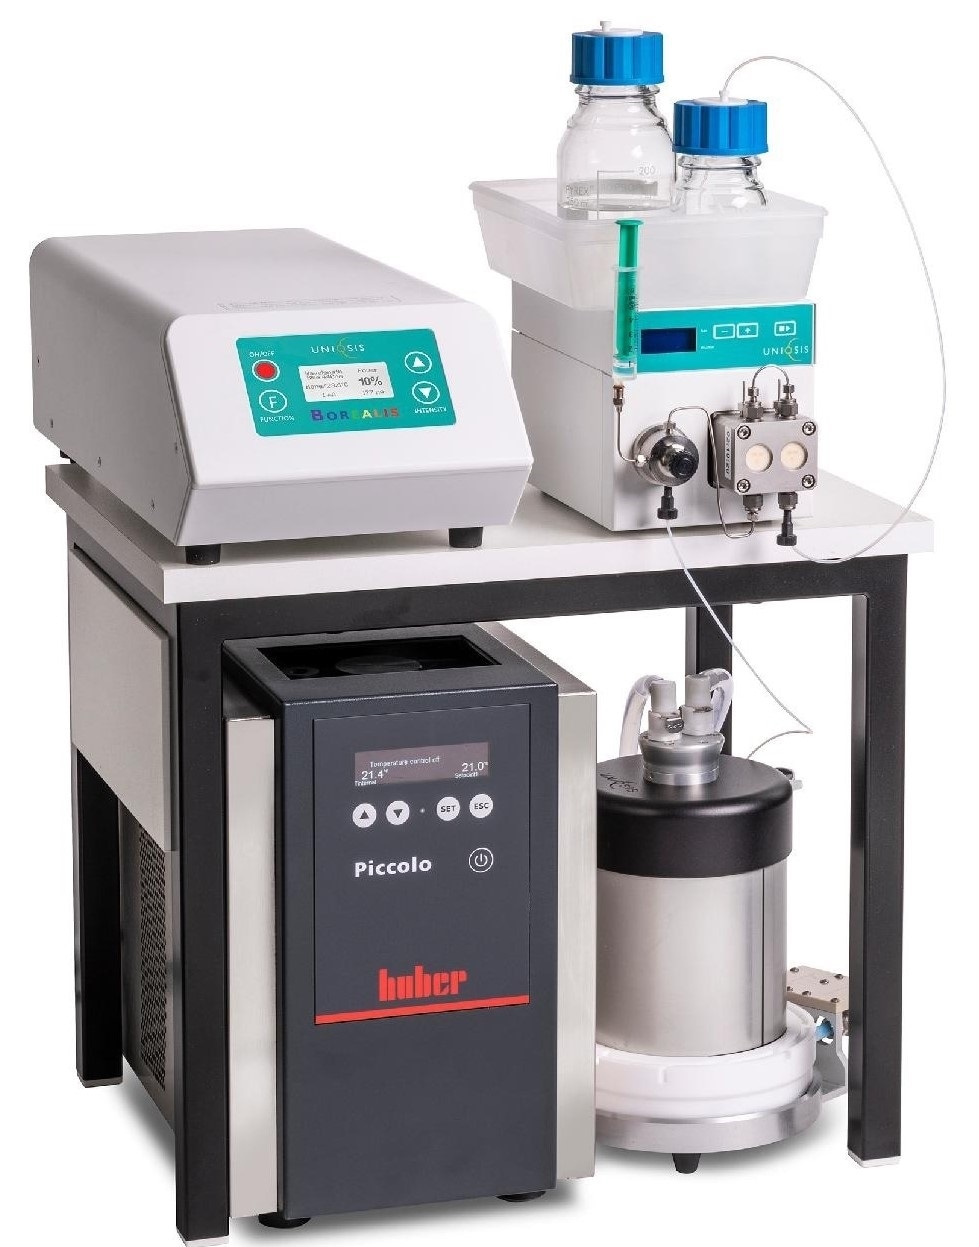 High yield photochemical flow synthesis